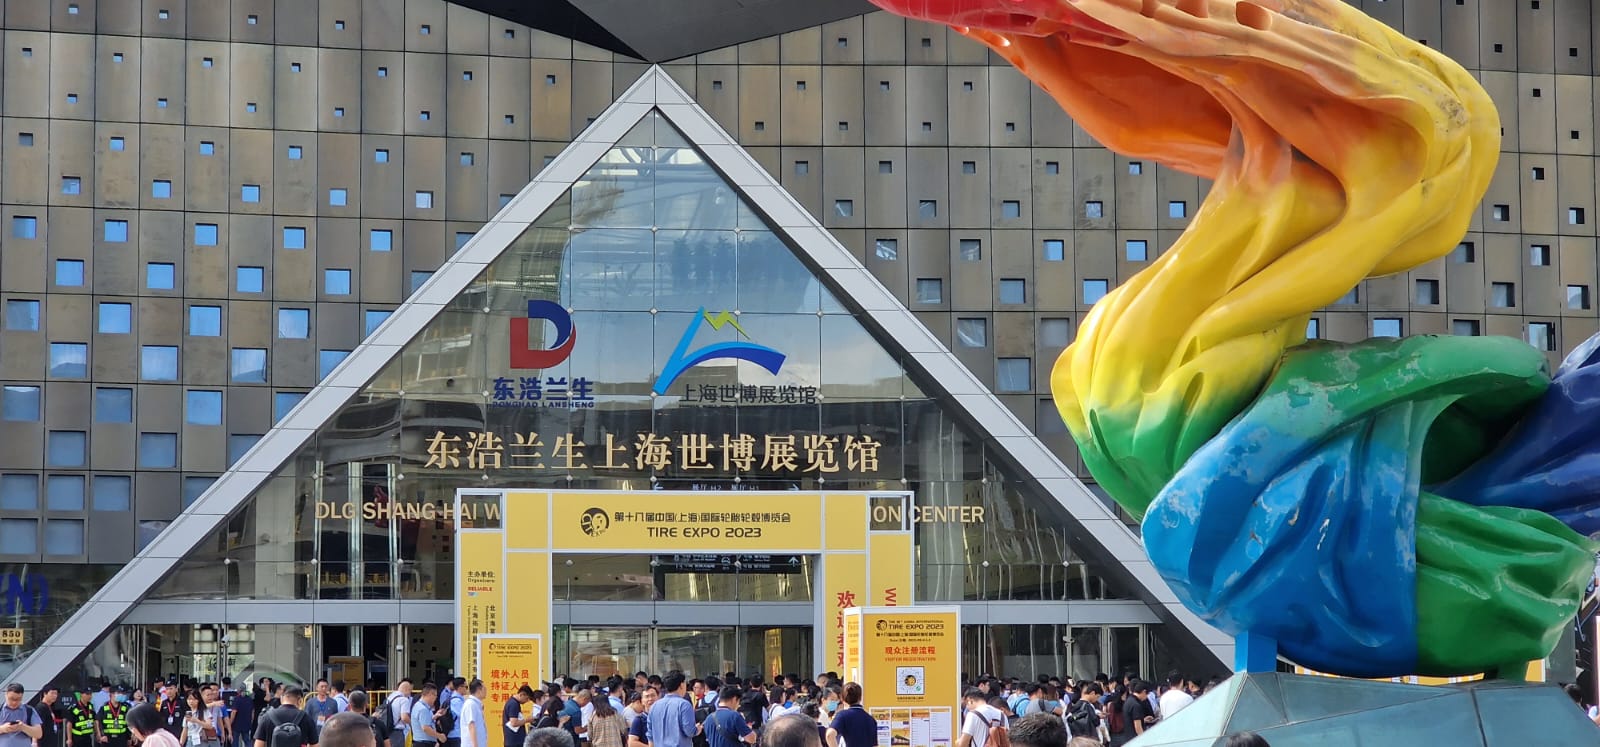 The 18th CITExpo officially opens in Shanghai